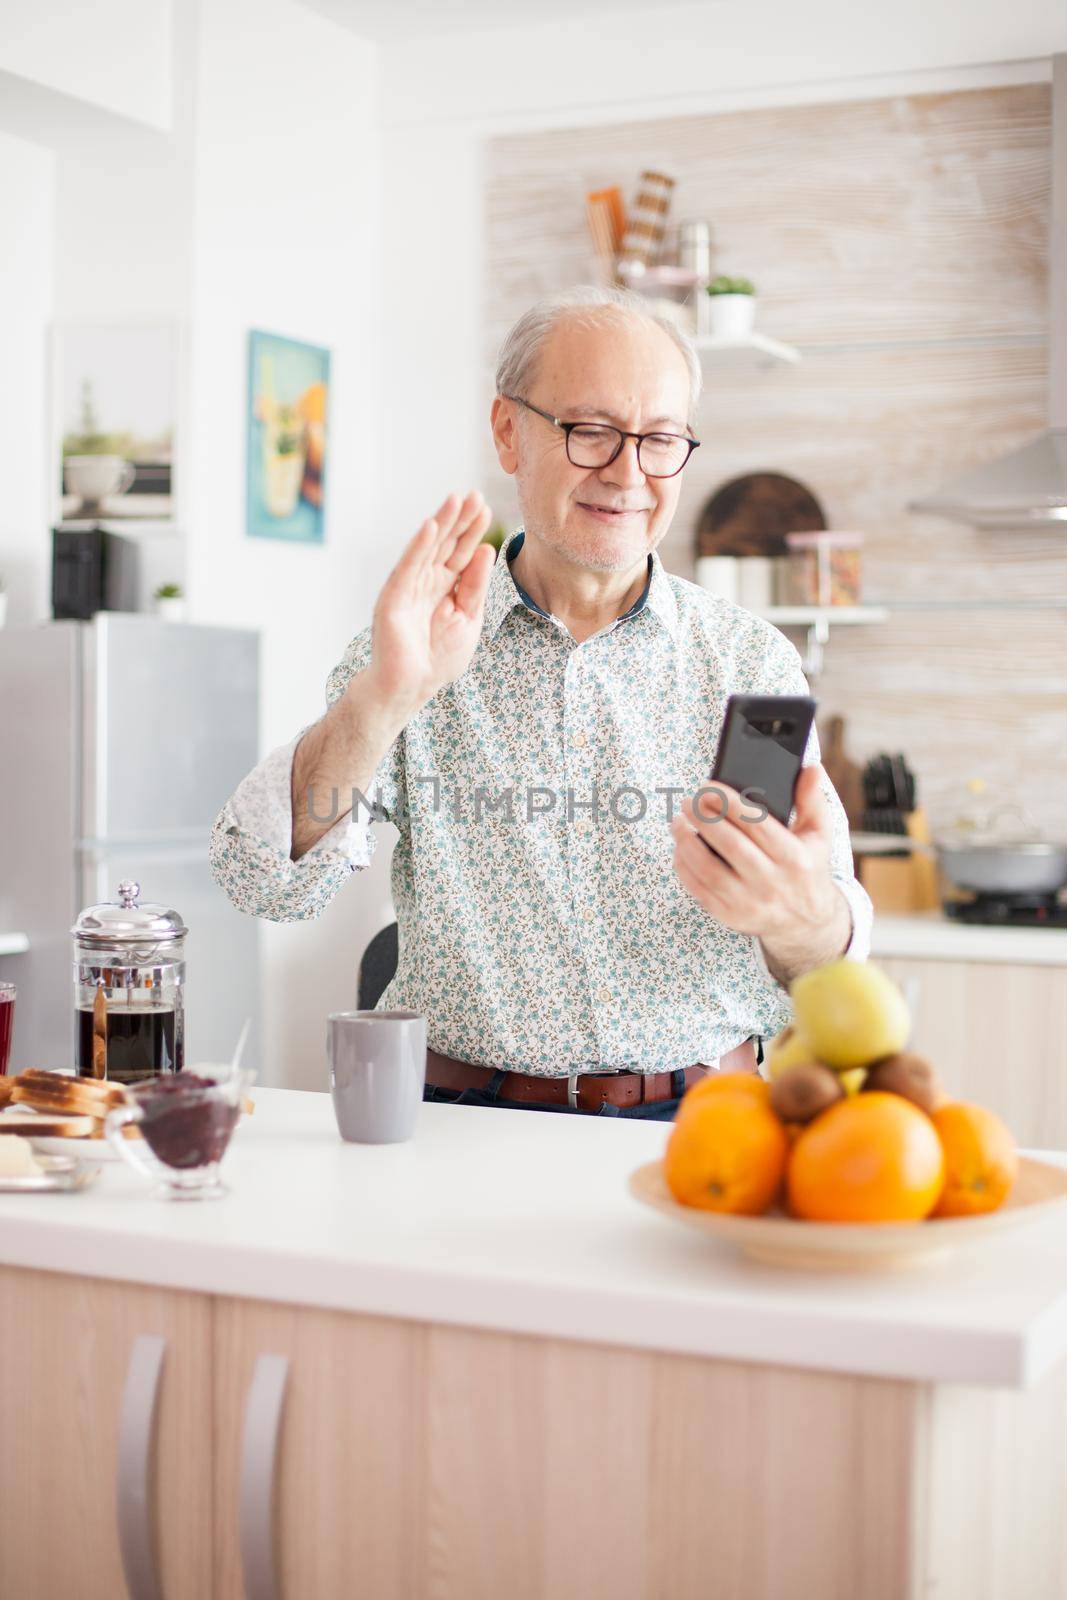 Senior man having a conversation, using his modern phone. Elderly aged man waving during a video conference with family in kitchen. Elderly person using internet online chat technology video webcam making a video call connection camera communication conference call